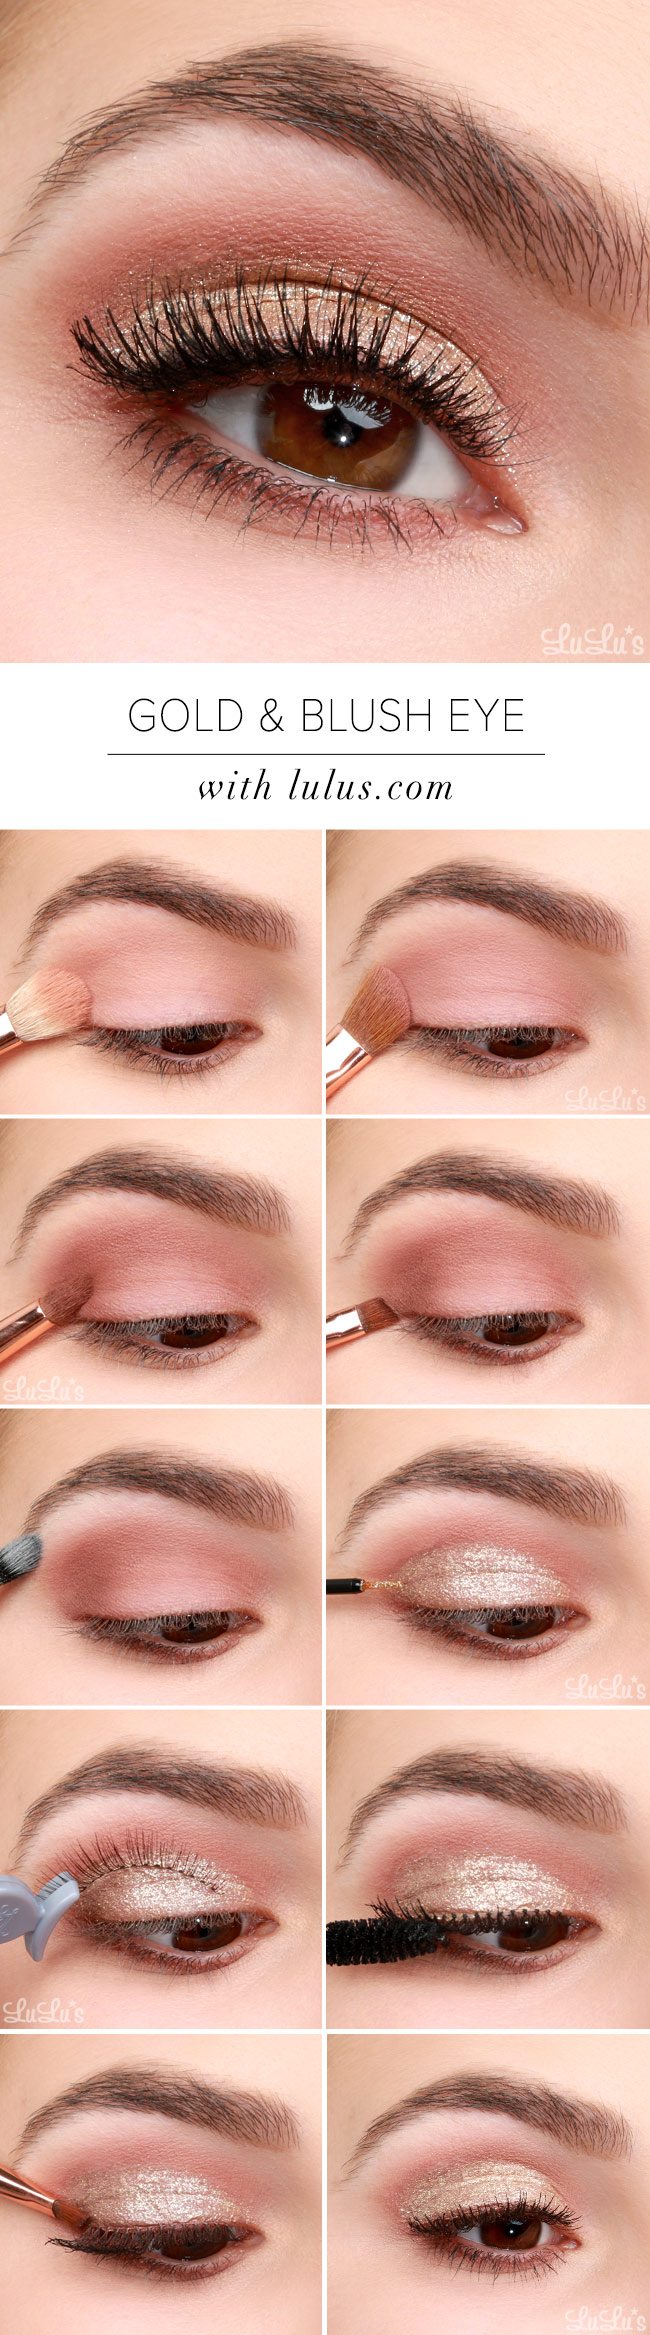 Gold Eye Makeup Tutorial Lulus How To Gold And Blush Valentines Day Eye Makeup Tutorial